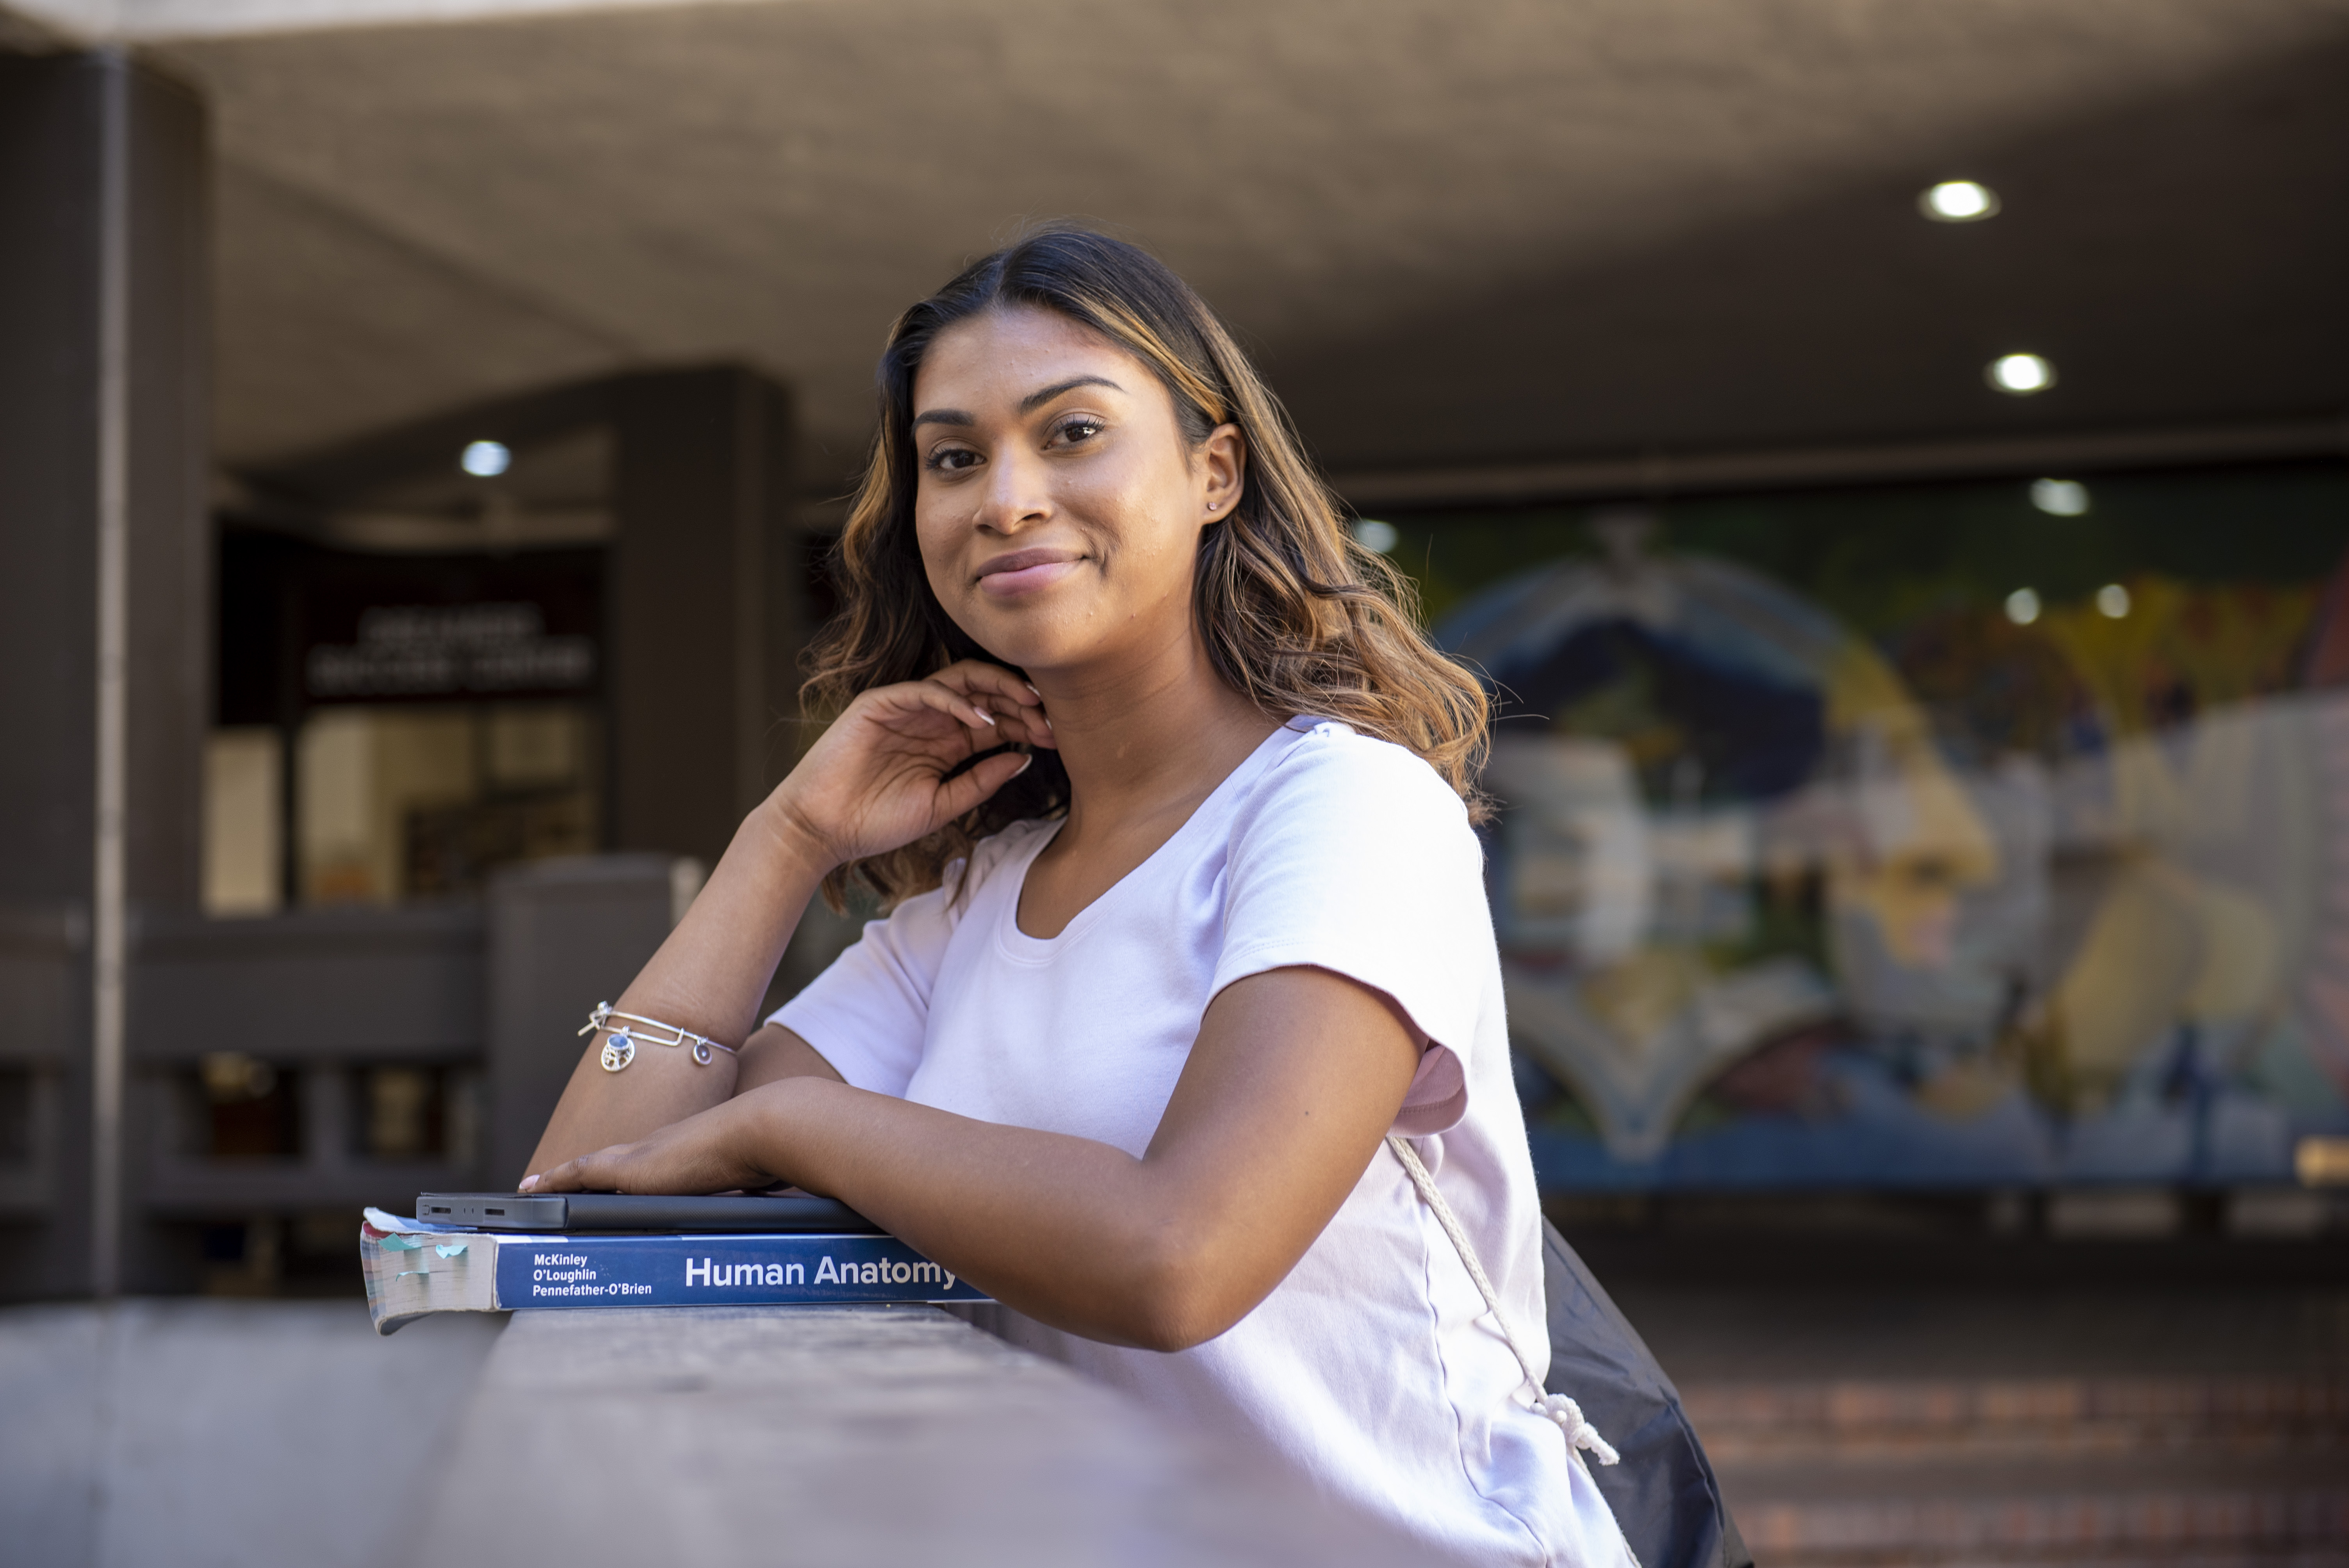 A Delta College student smiling with textbook